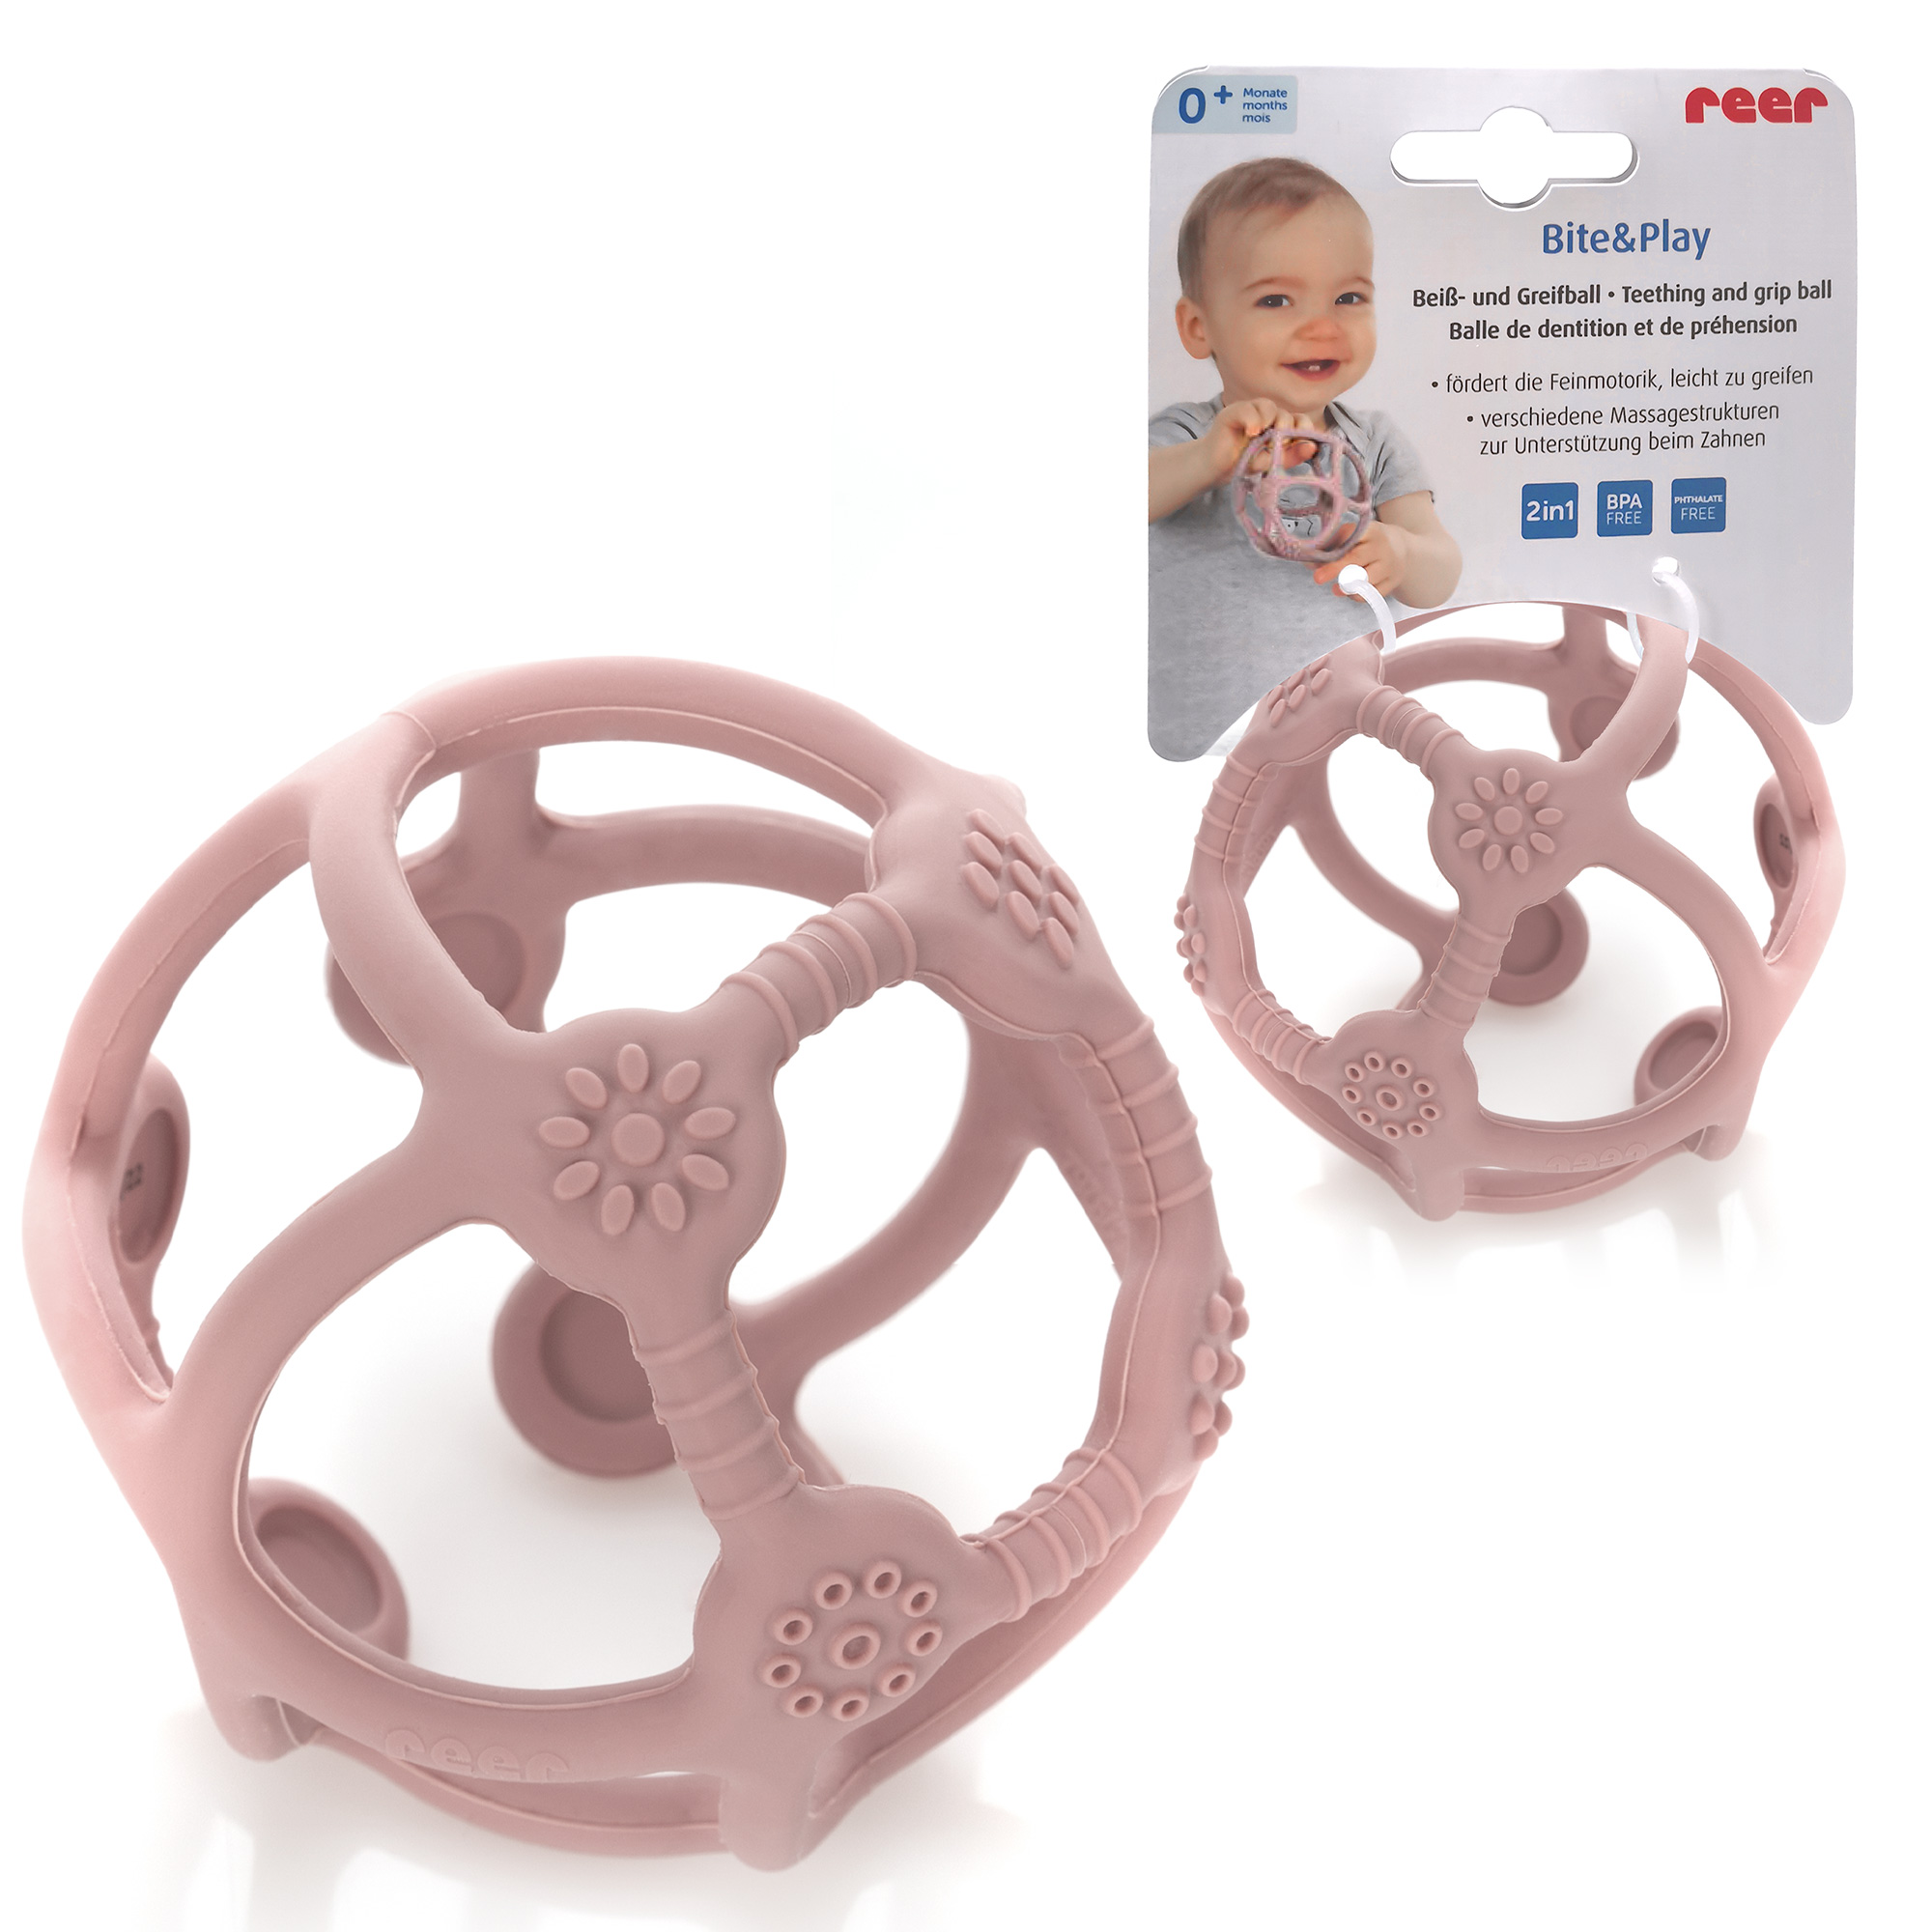 Bite&Play Teething and grip ball, rose